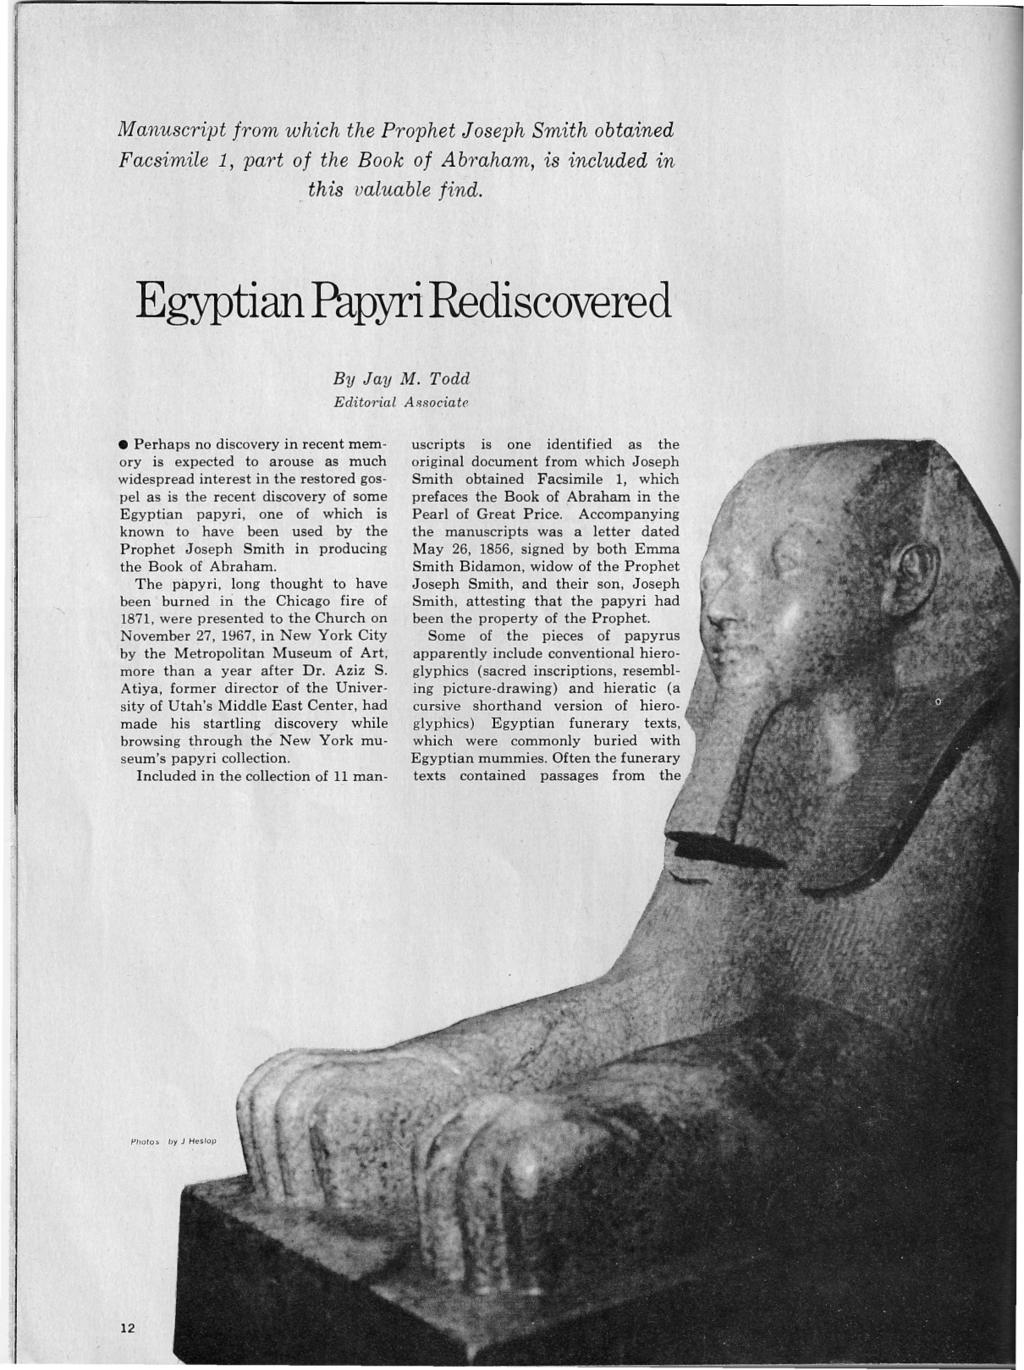 Manuscript from which the Prophet Joseph Smith obtained Facsimile 1, part of the Book of Abraham, is included ~n..this valuable find. Egyptian Papyri Rediscovered By Jay M. Todd Edito1'ial A.~sociate.